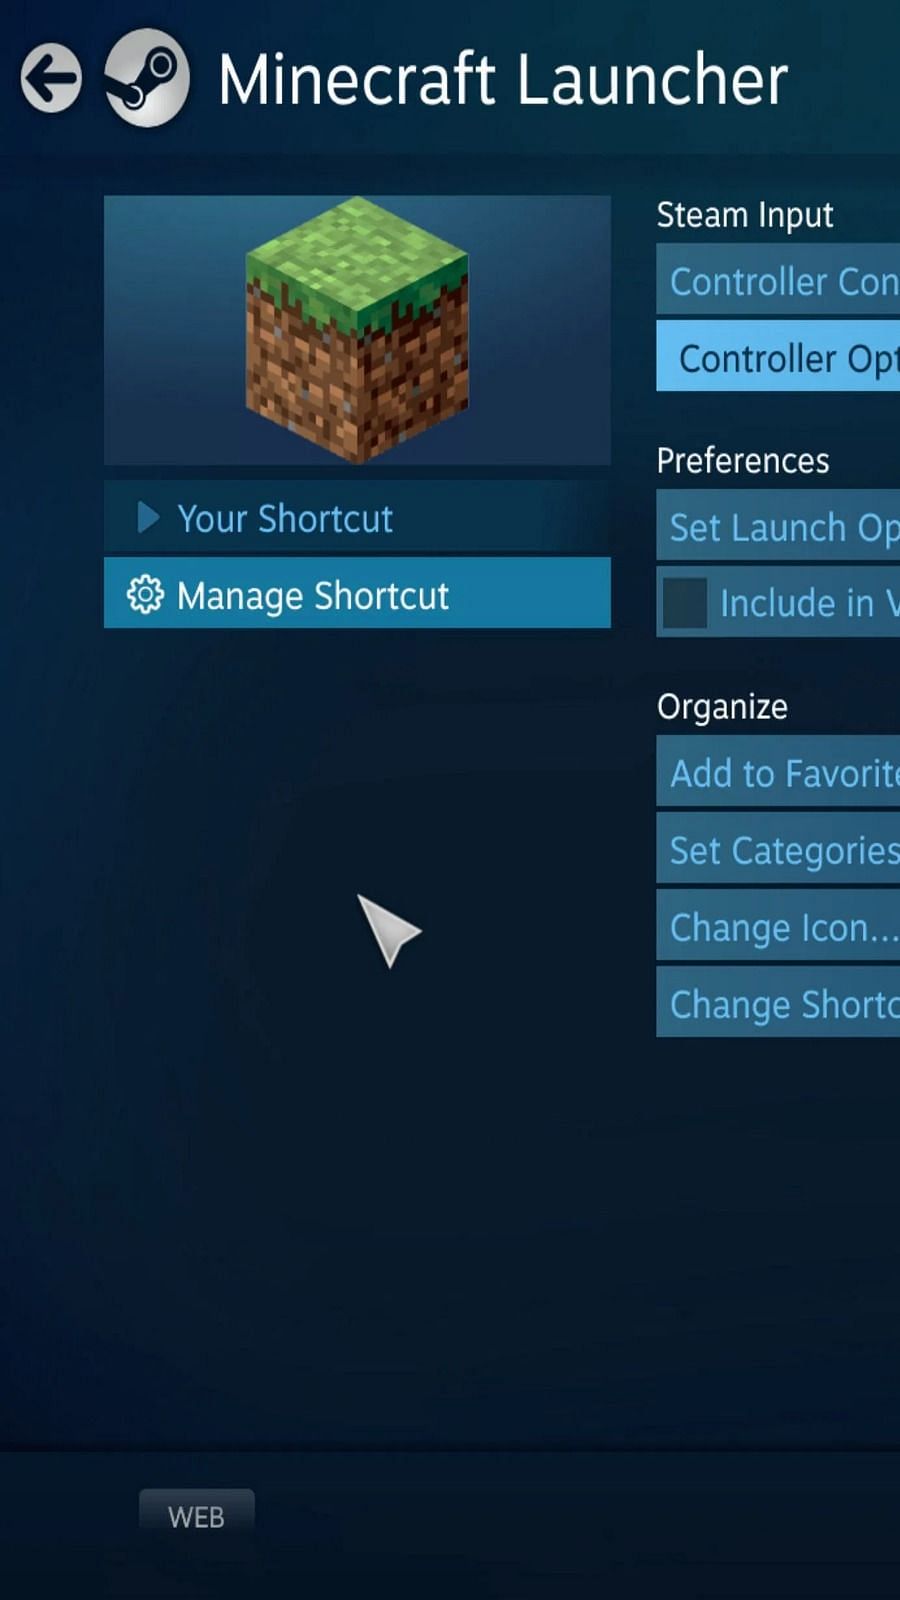 can i use a ps4 controller for minecraft pc